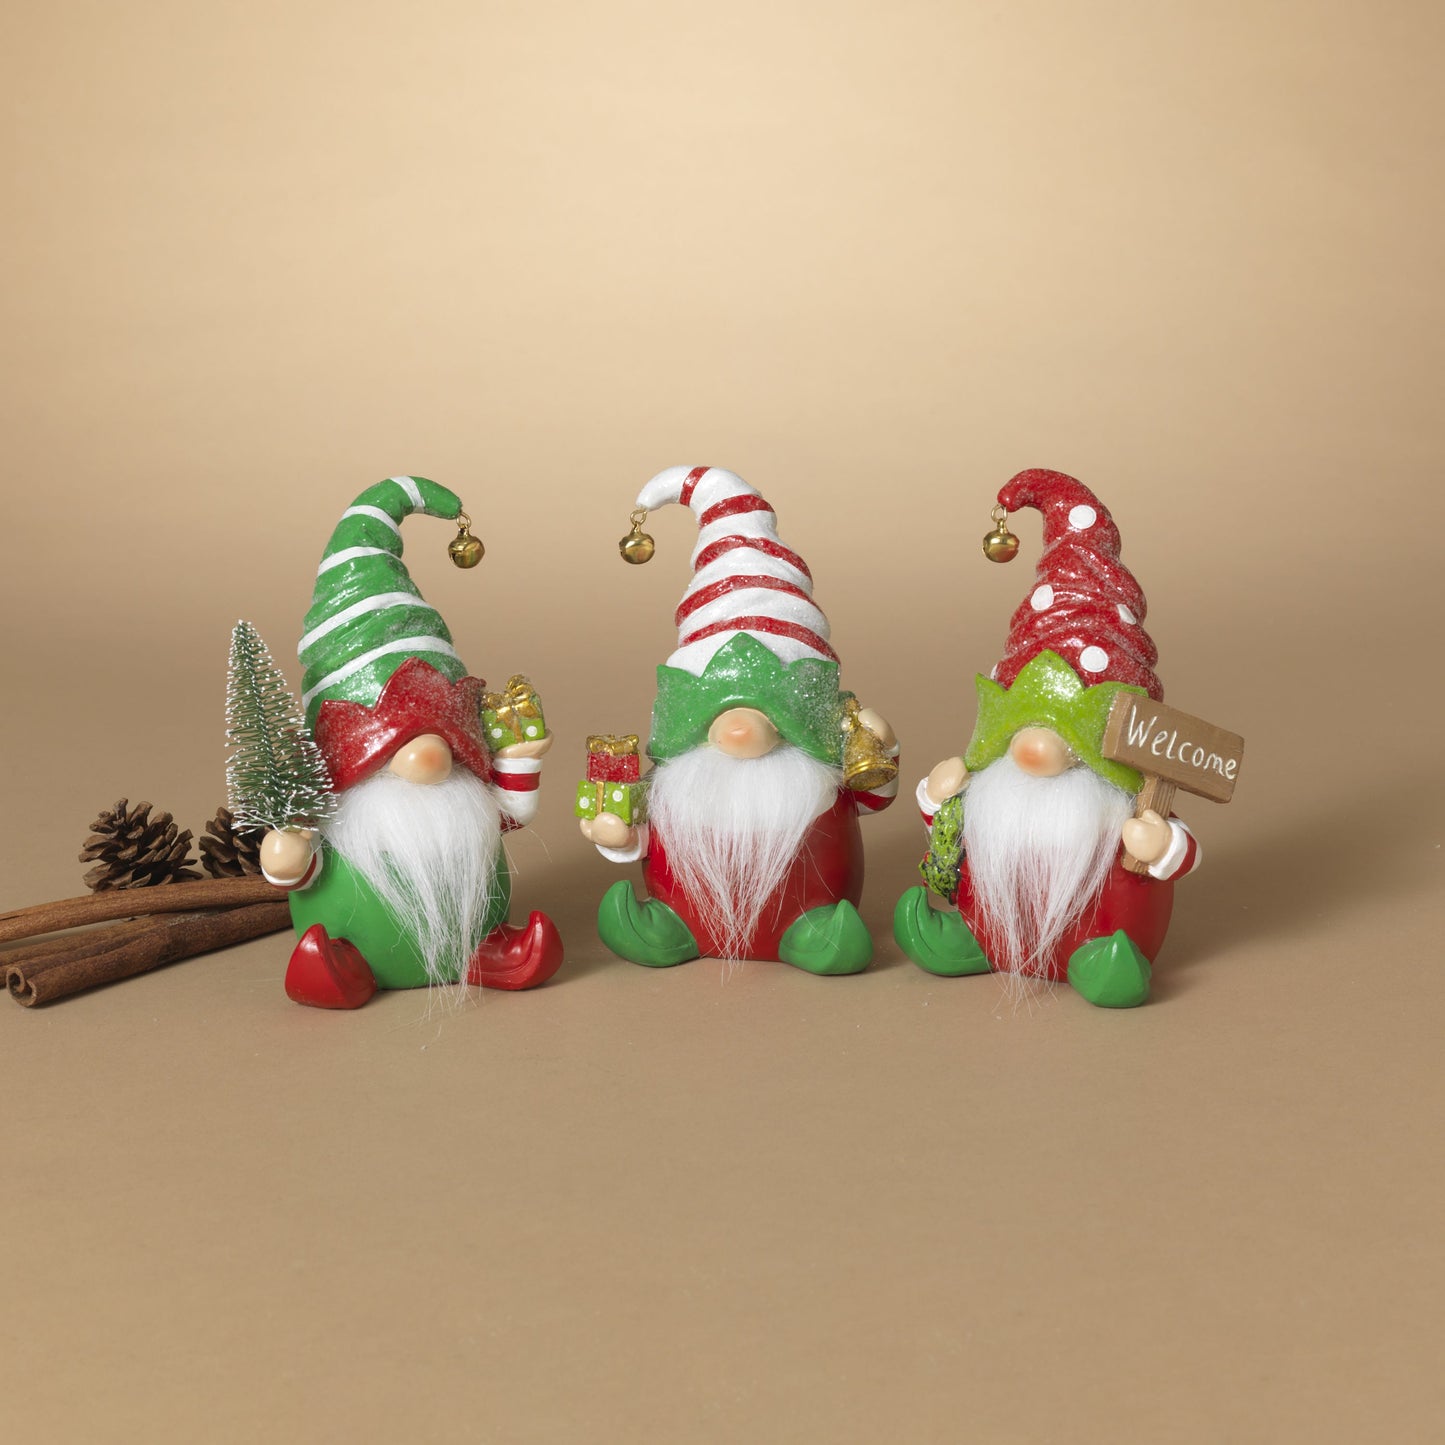 Gerson Company 6.1"H Resin Holiday Elf Gnome, 3 Asst